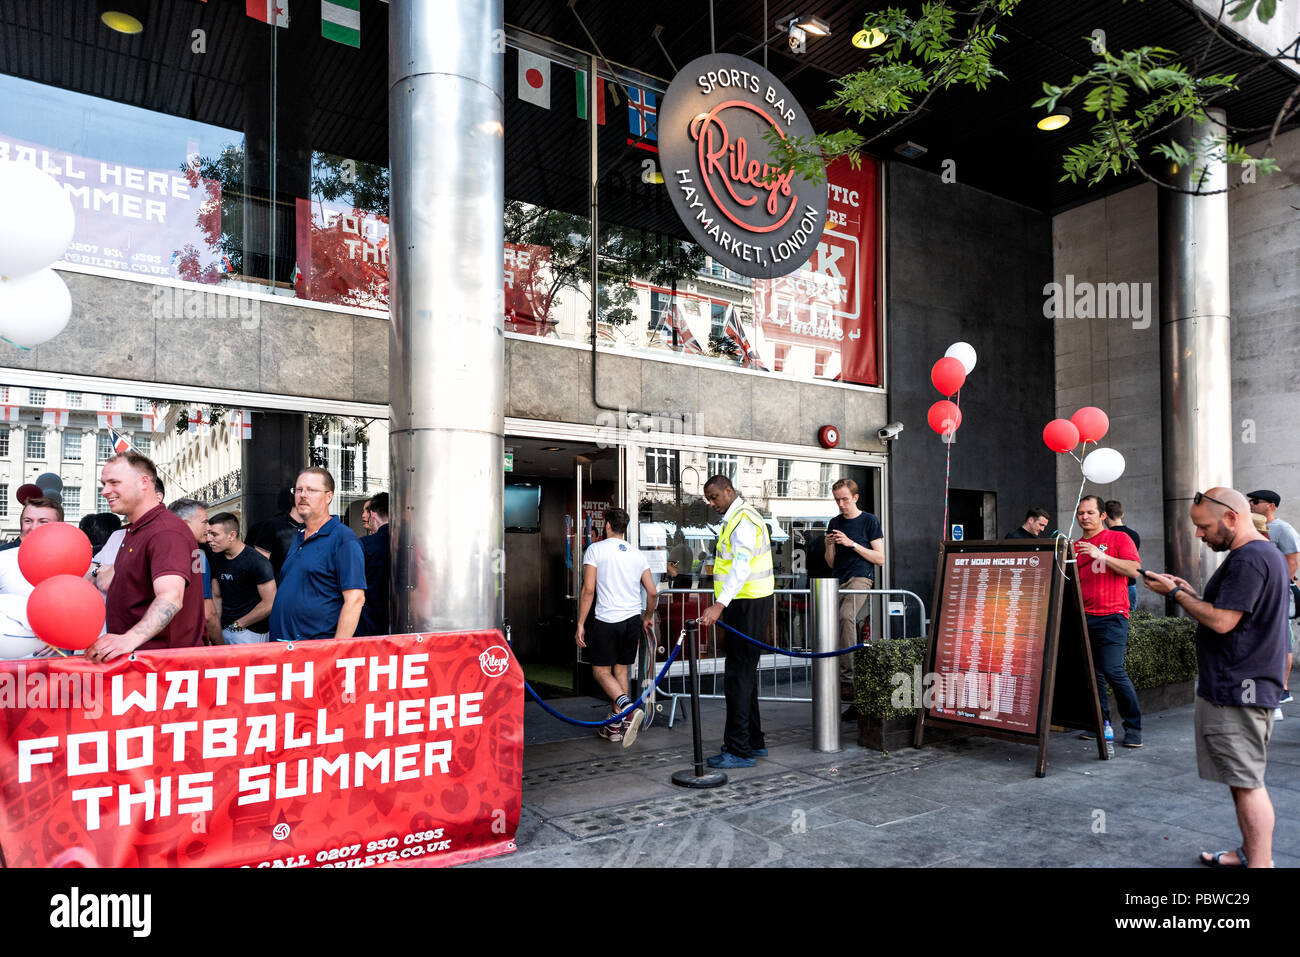 London, UK - June 24, 2018: People men lined up in line queue standing waiting by sidewalk street in England, by Riley's Sports Bar pub for watching F Stock Photo